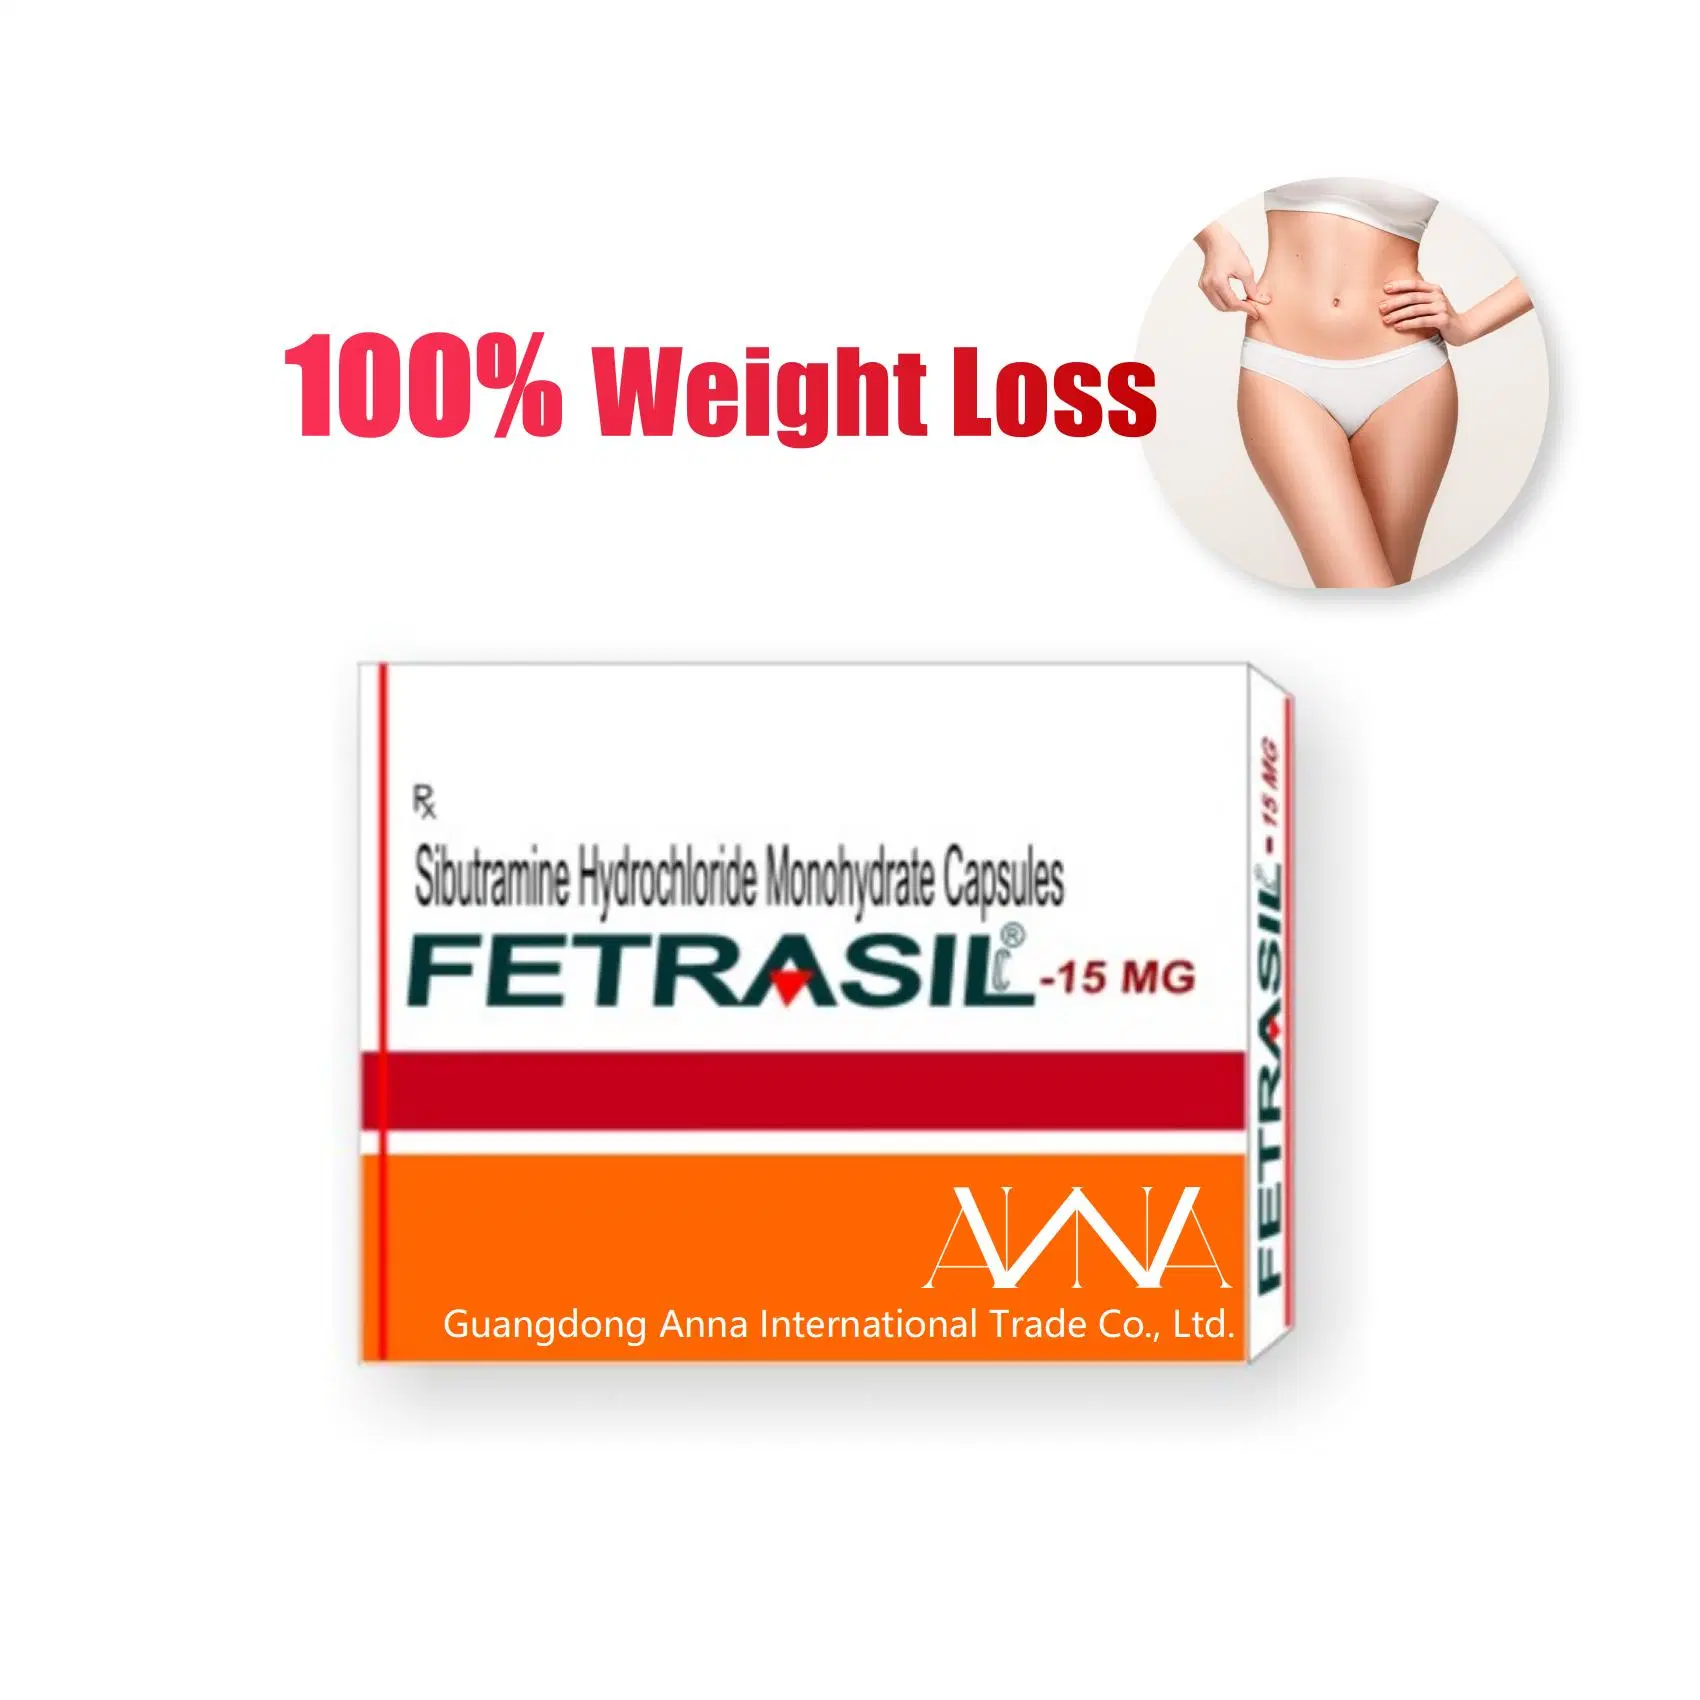 Tenuate Restart Slimming Capsules Sibutramiin for Lose Weight Tablets